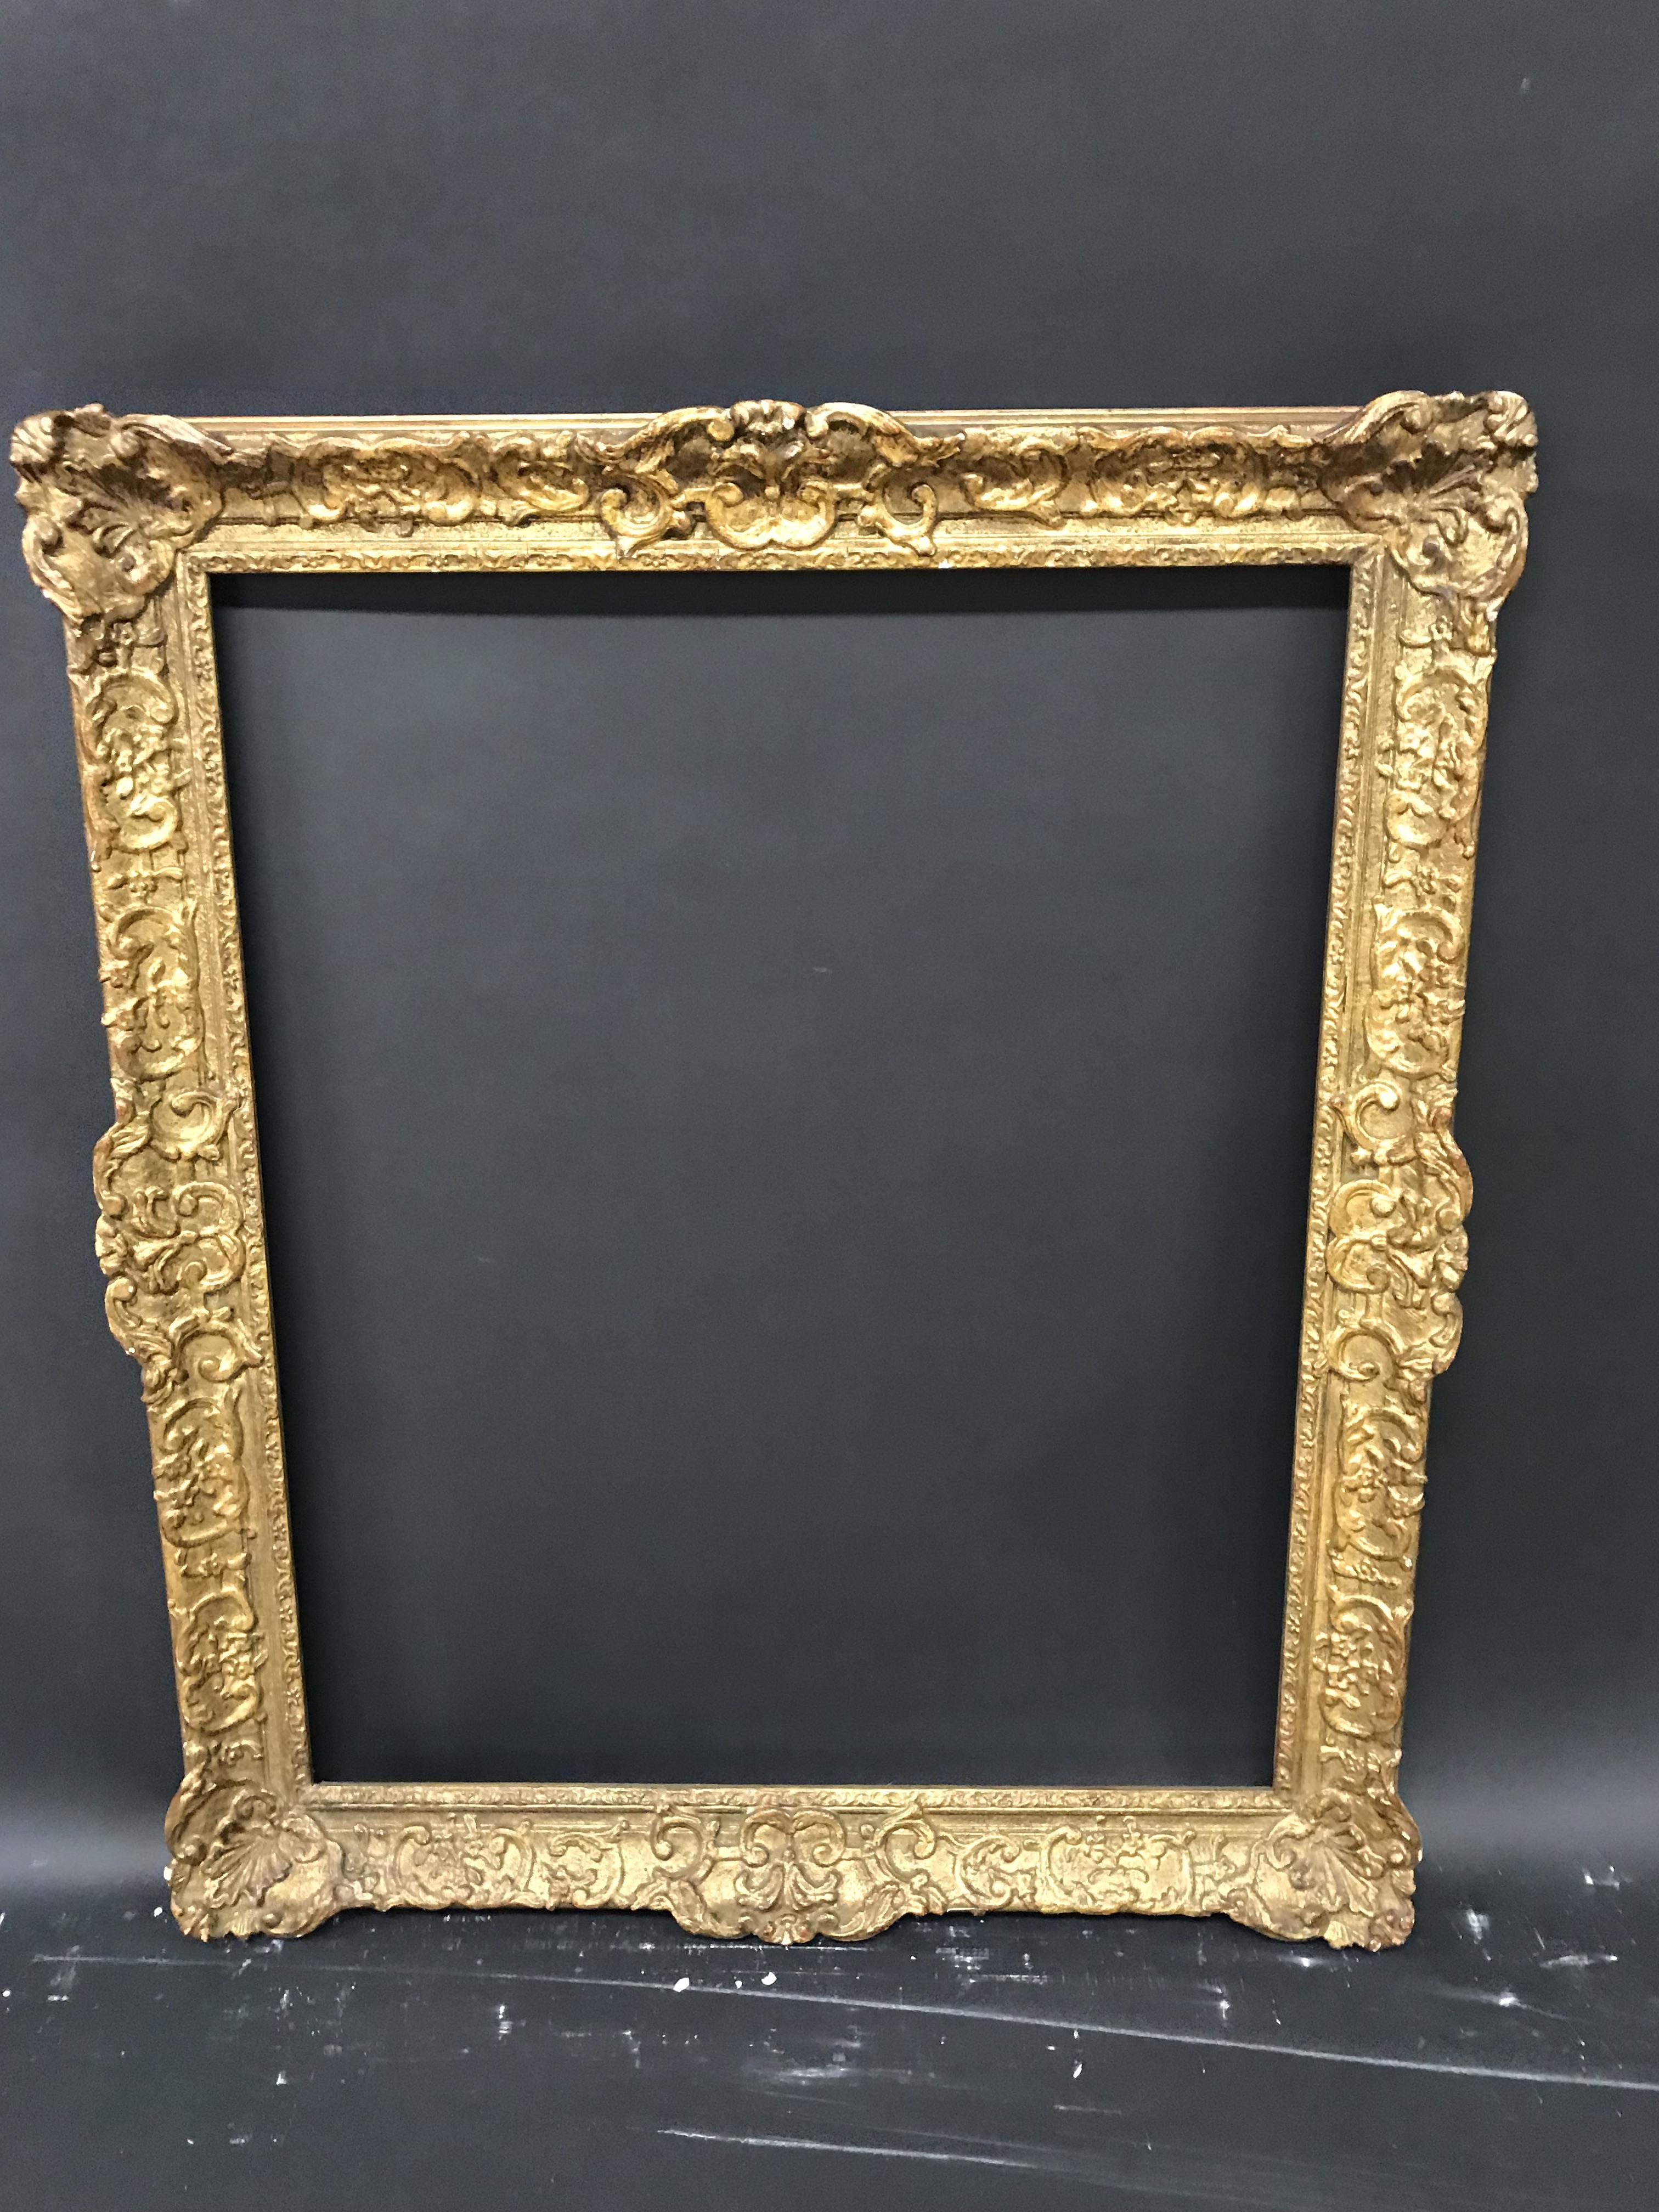 20th Century English School. A Gilt Composition Frame, 24" x 19.5" (rebate). - Image 2 of 3